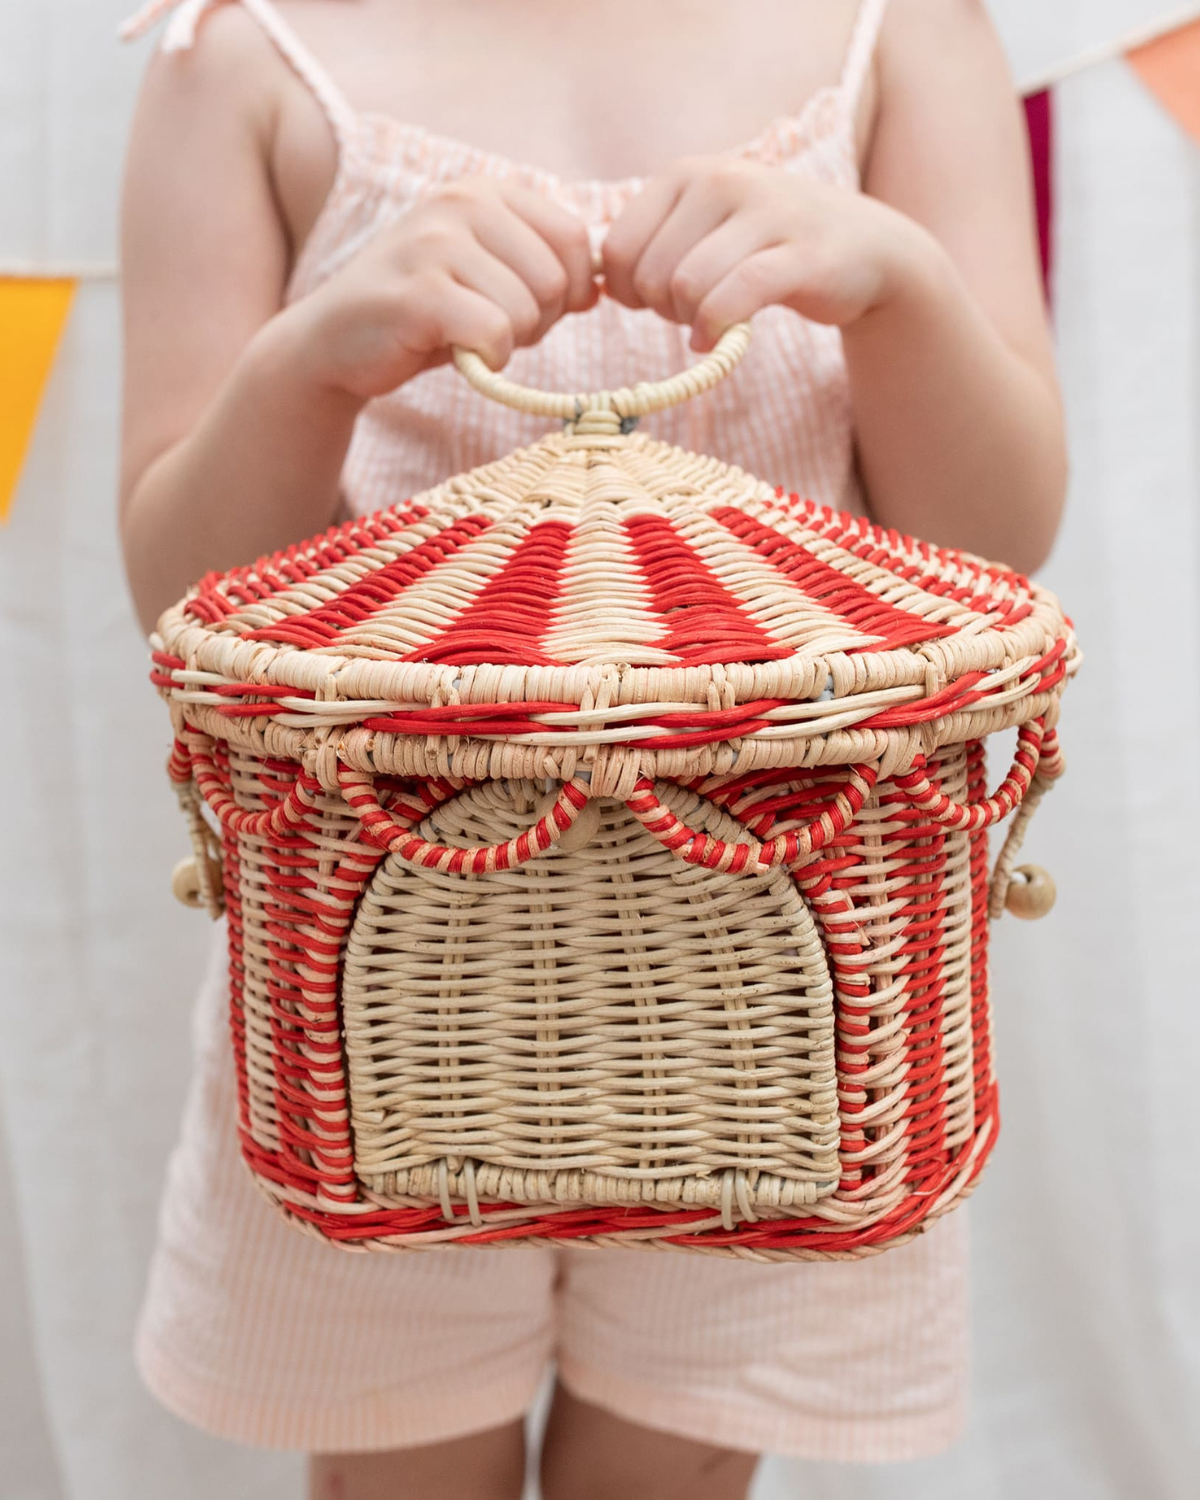 Red and Straw Circus Tent Basket for decorative purposes